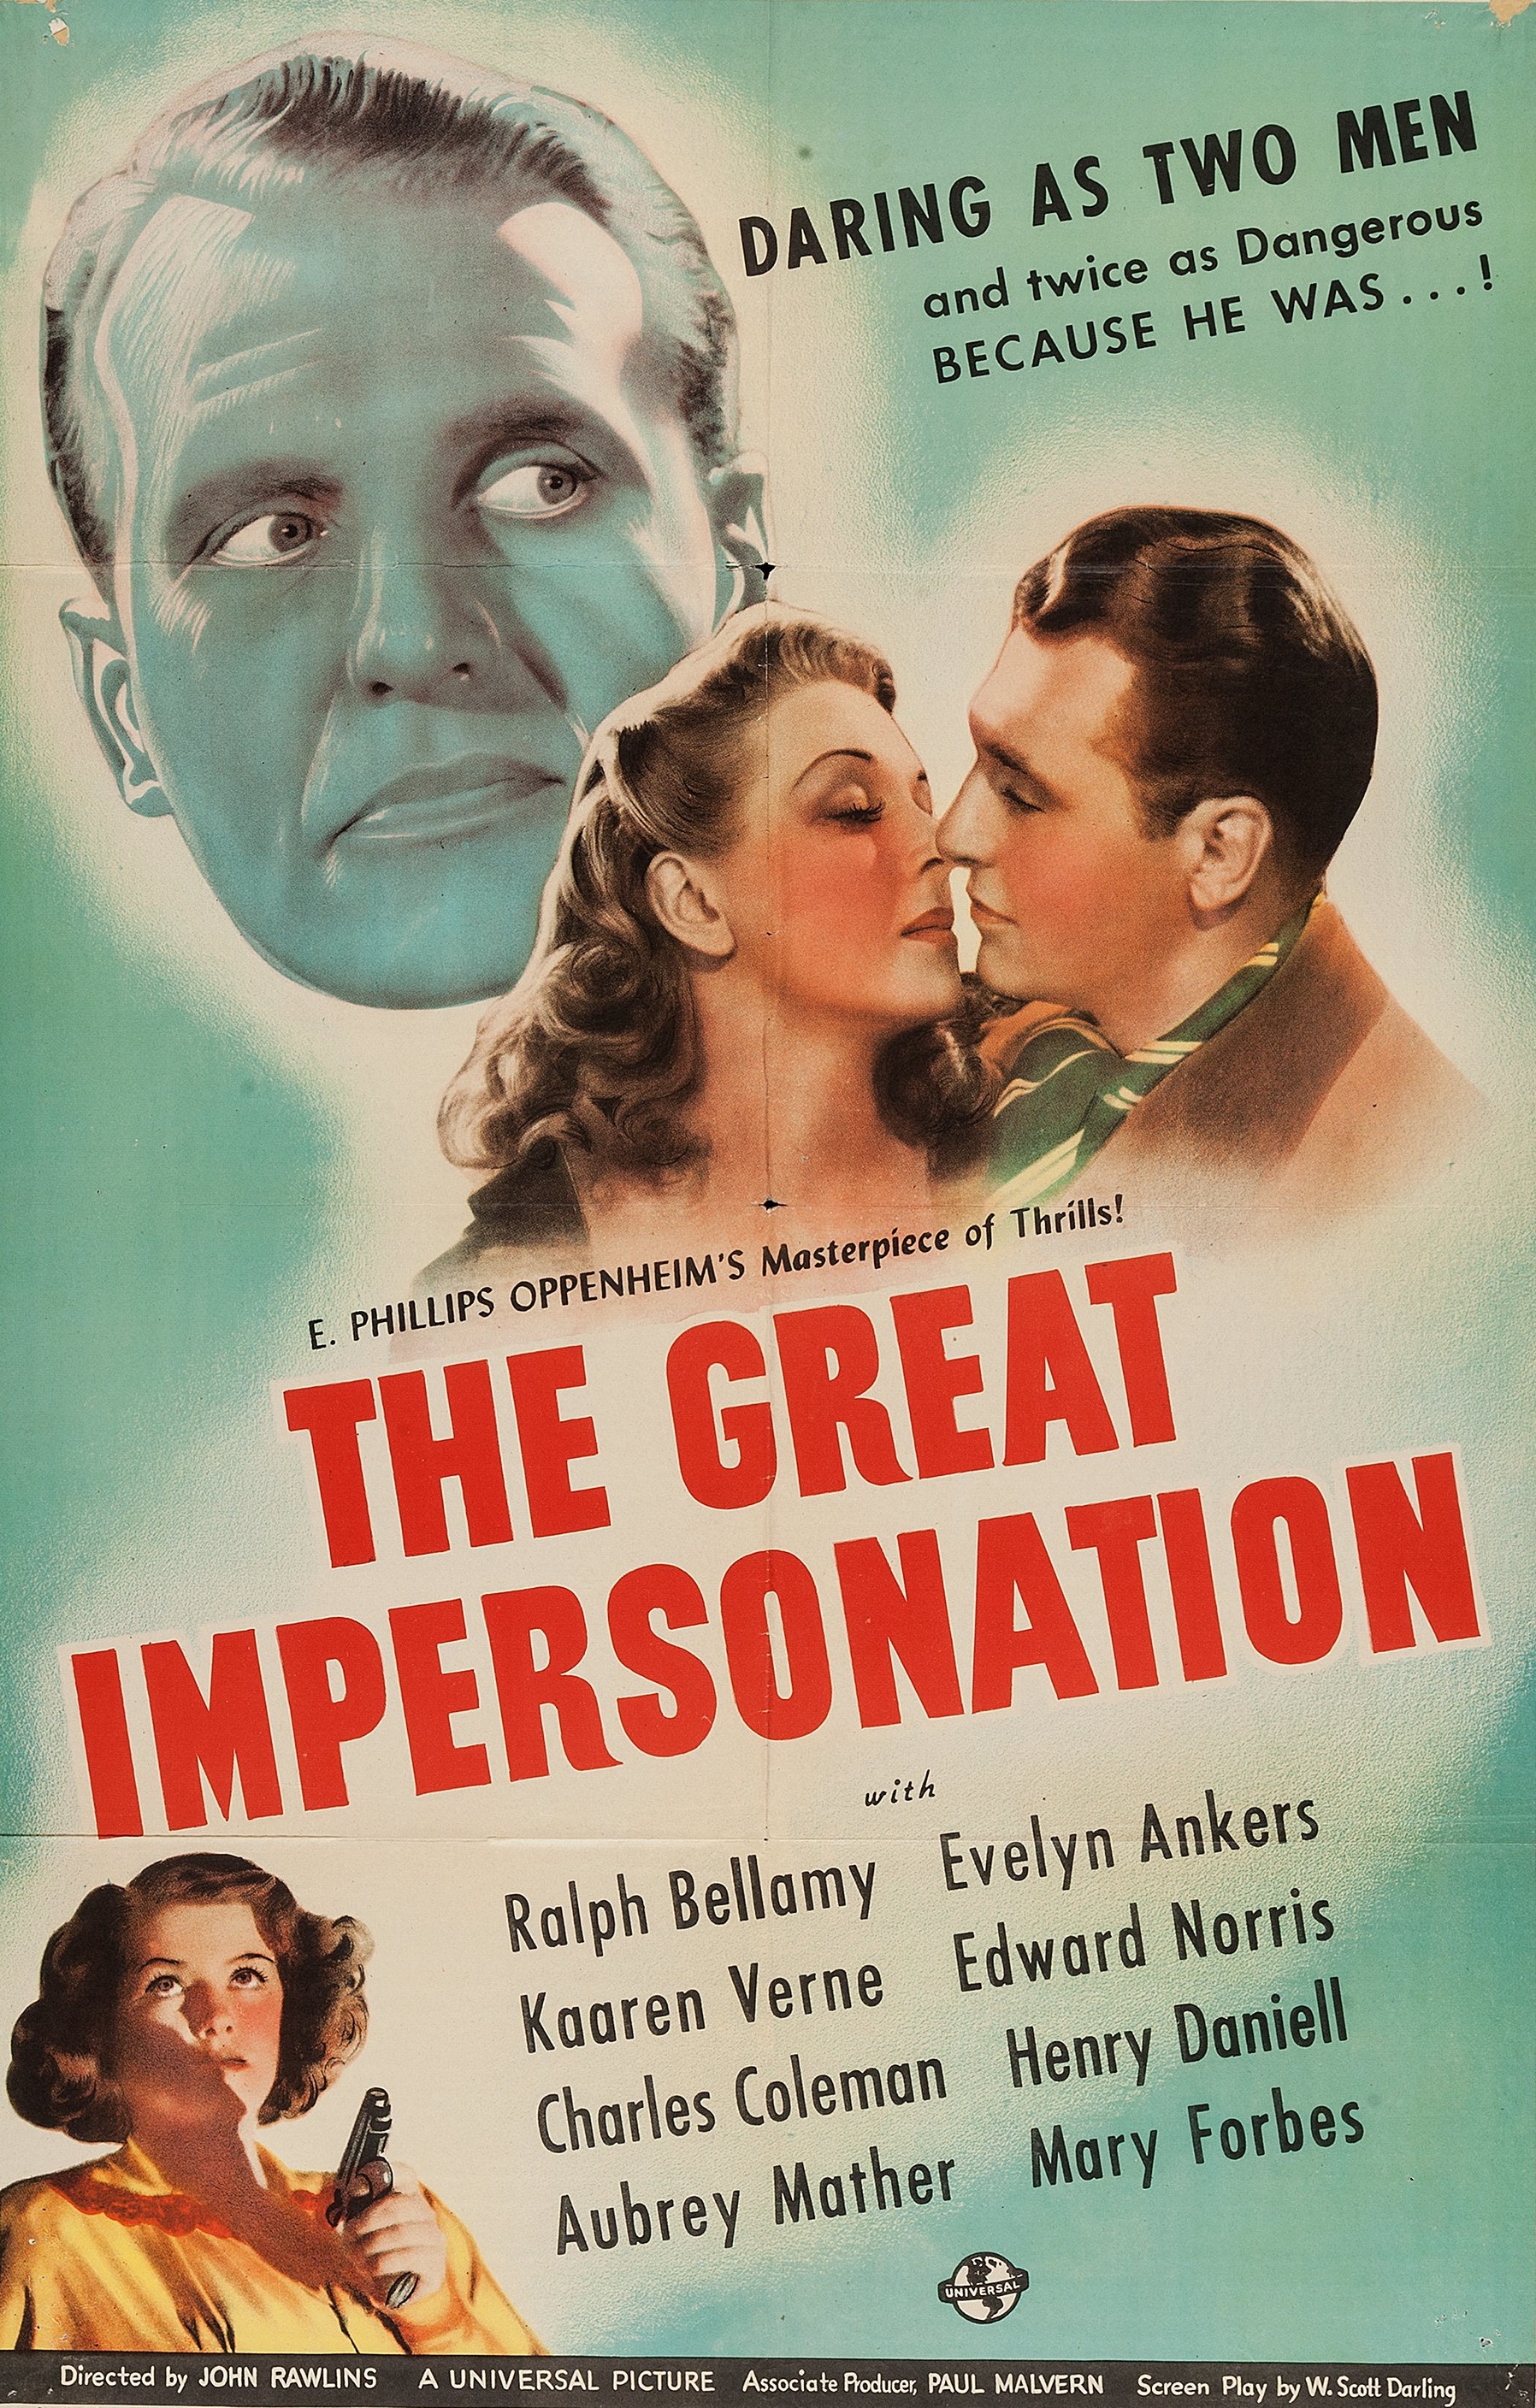 The Great Impersonation (1942) Screenshot 3 